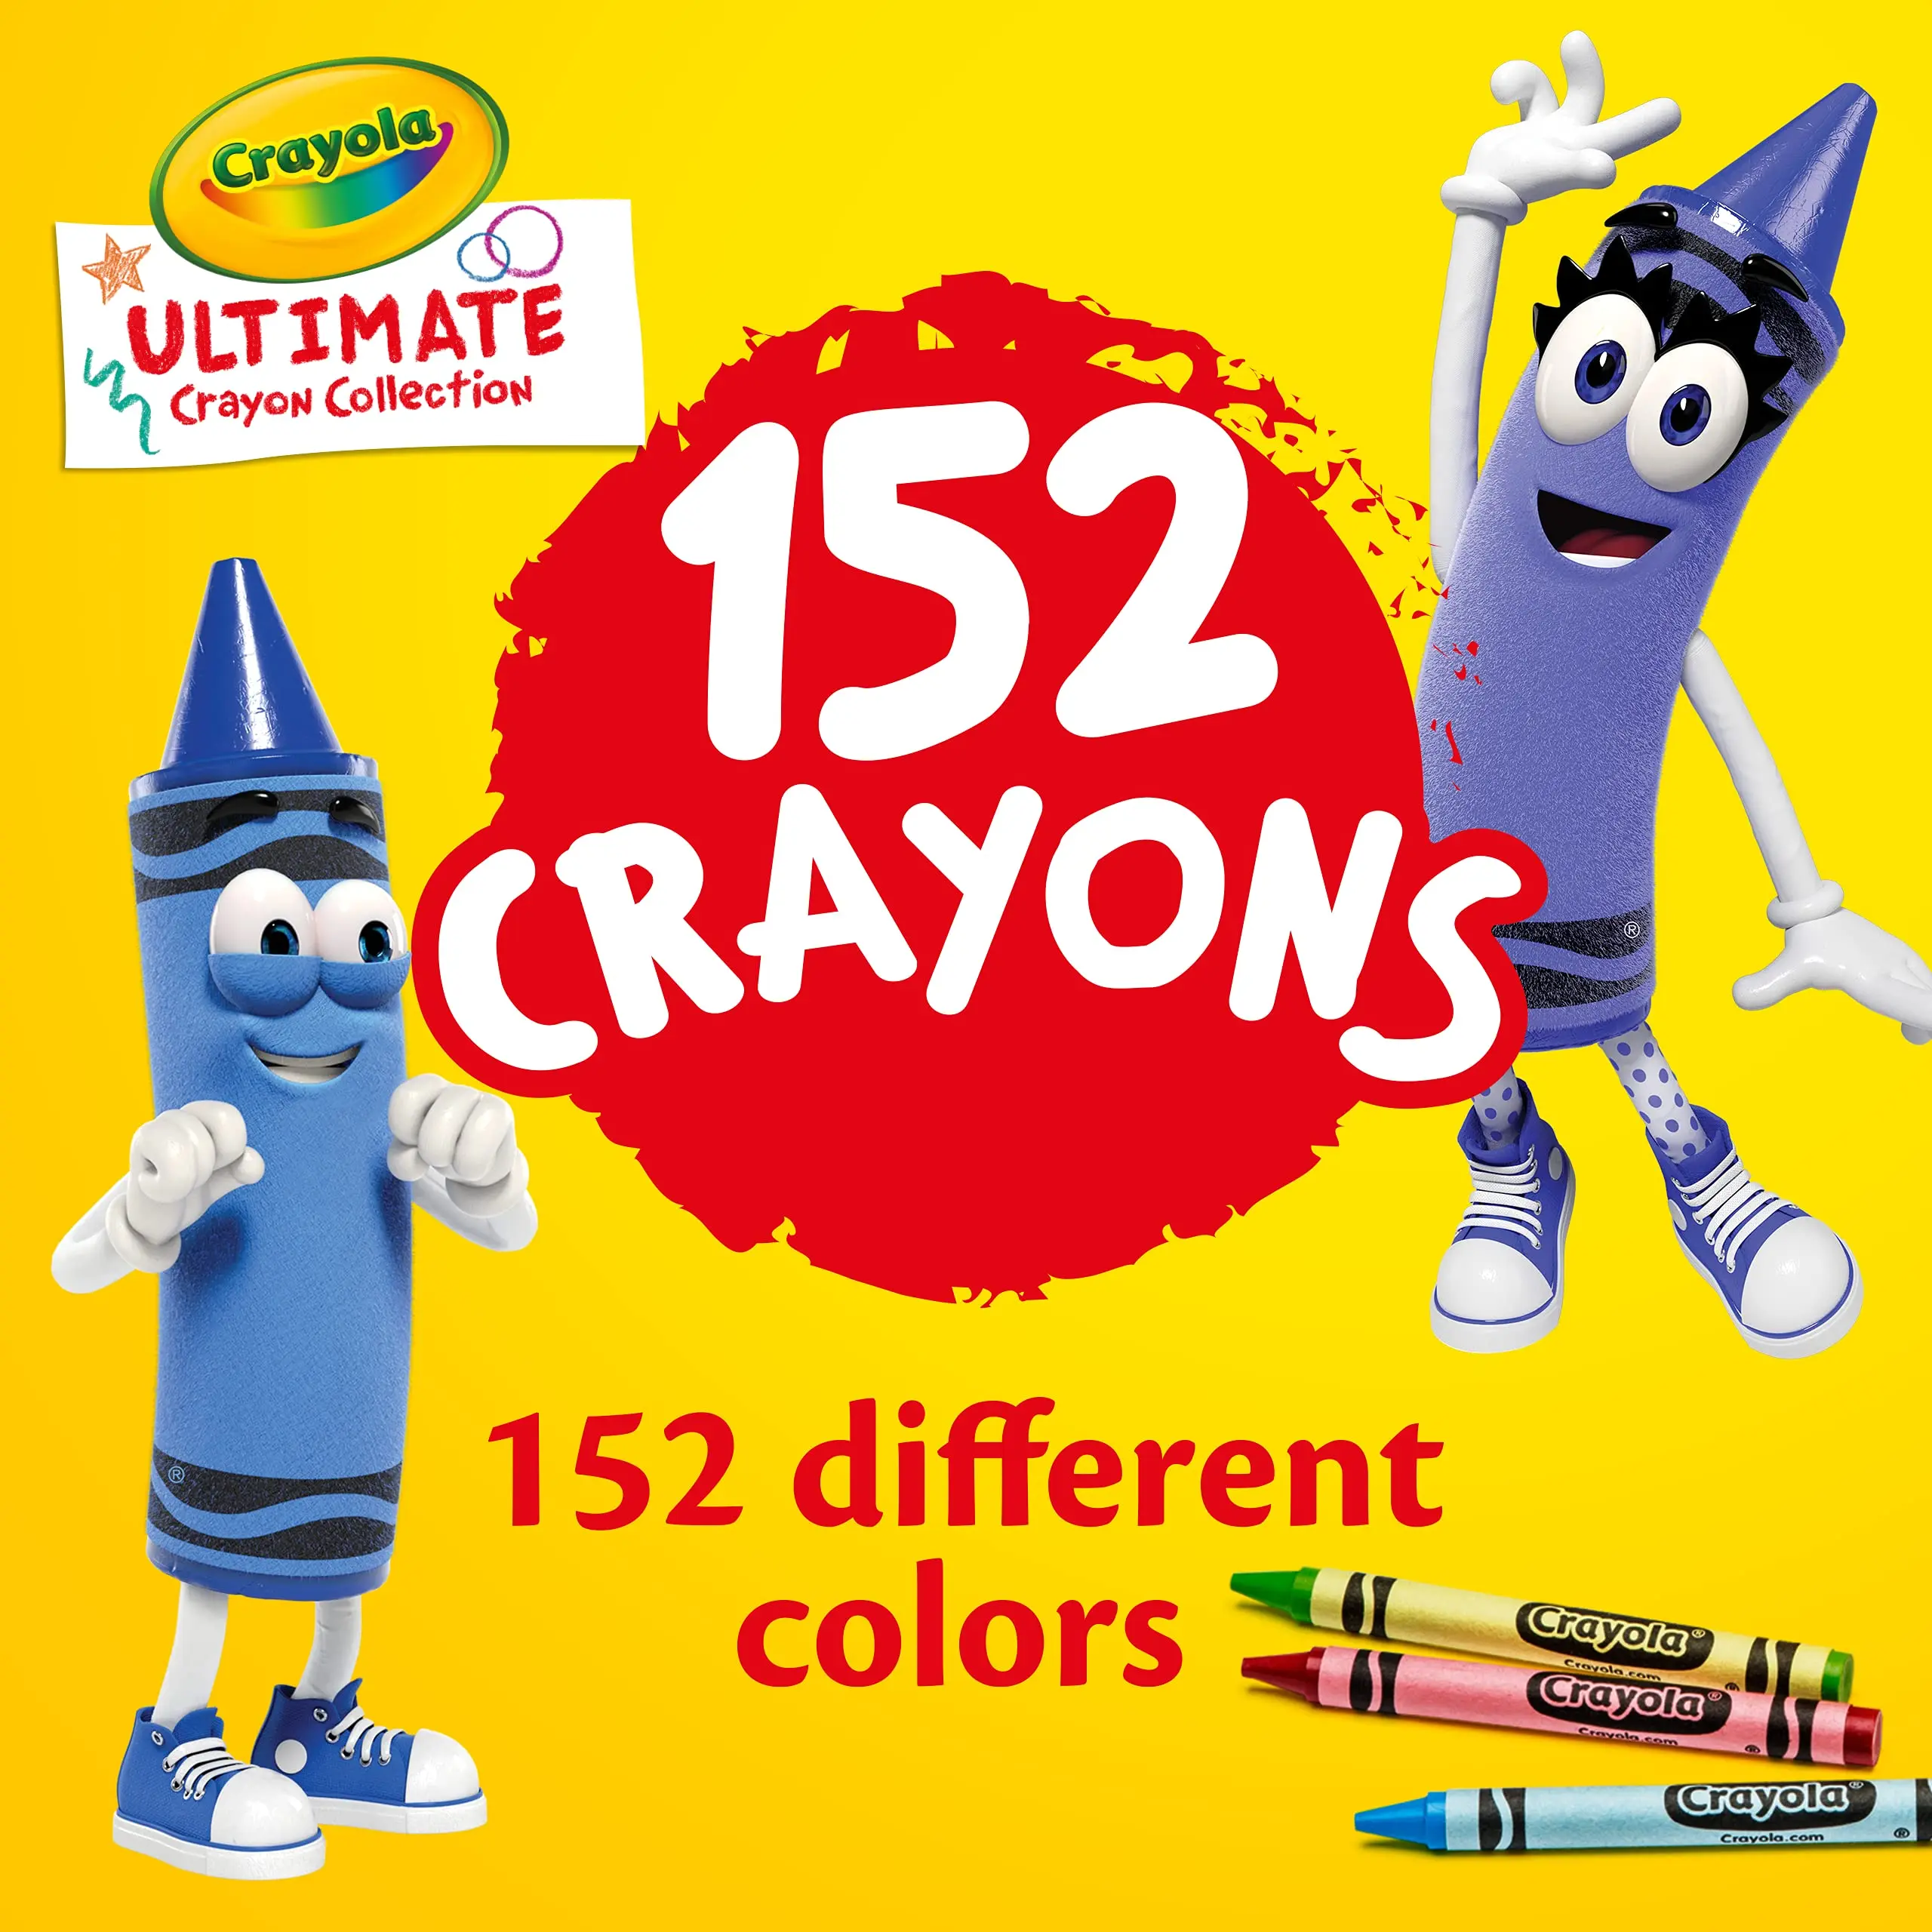 https://ae01.alicdn.com/kf/S5501f3f28963456fad8ee270316ccb93P/Crayola-Ultimate-Crayons-Case-Art-Painting-Supplies-152-Colors-For-Kids-52-0030.jpg